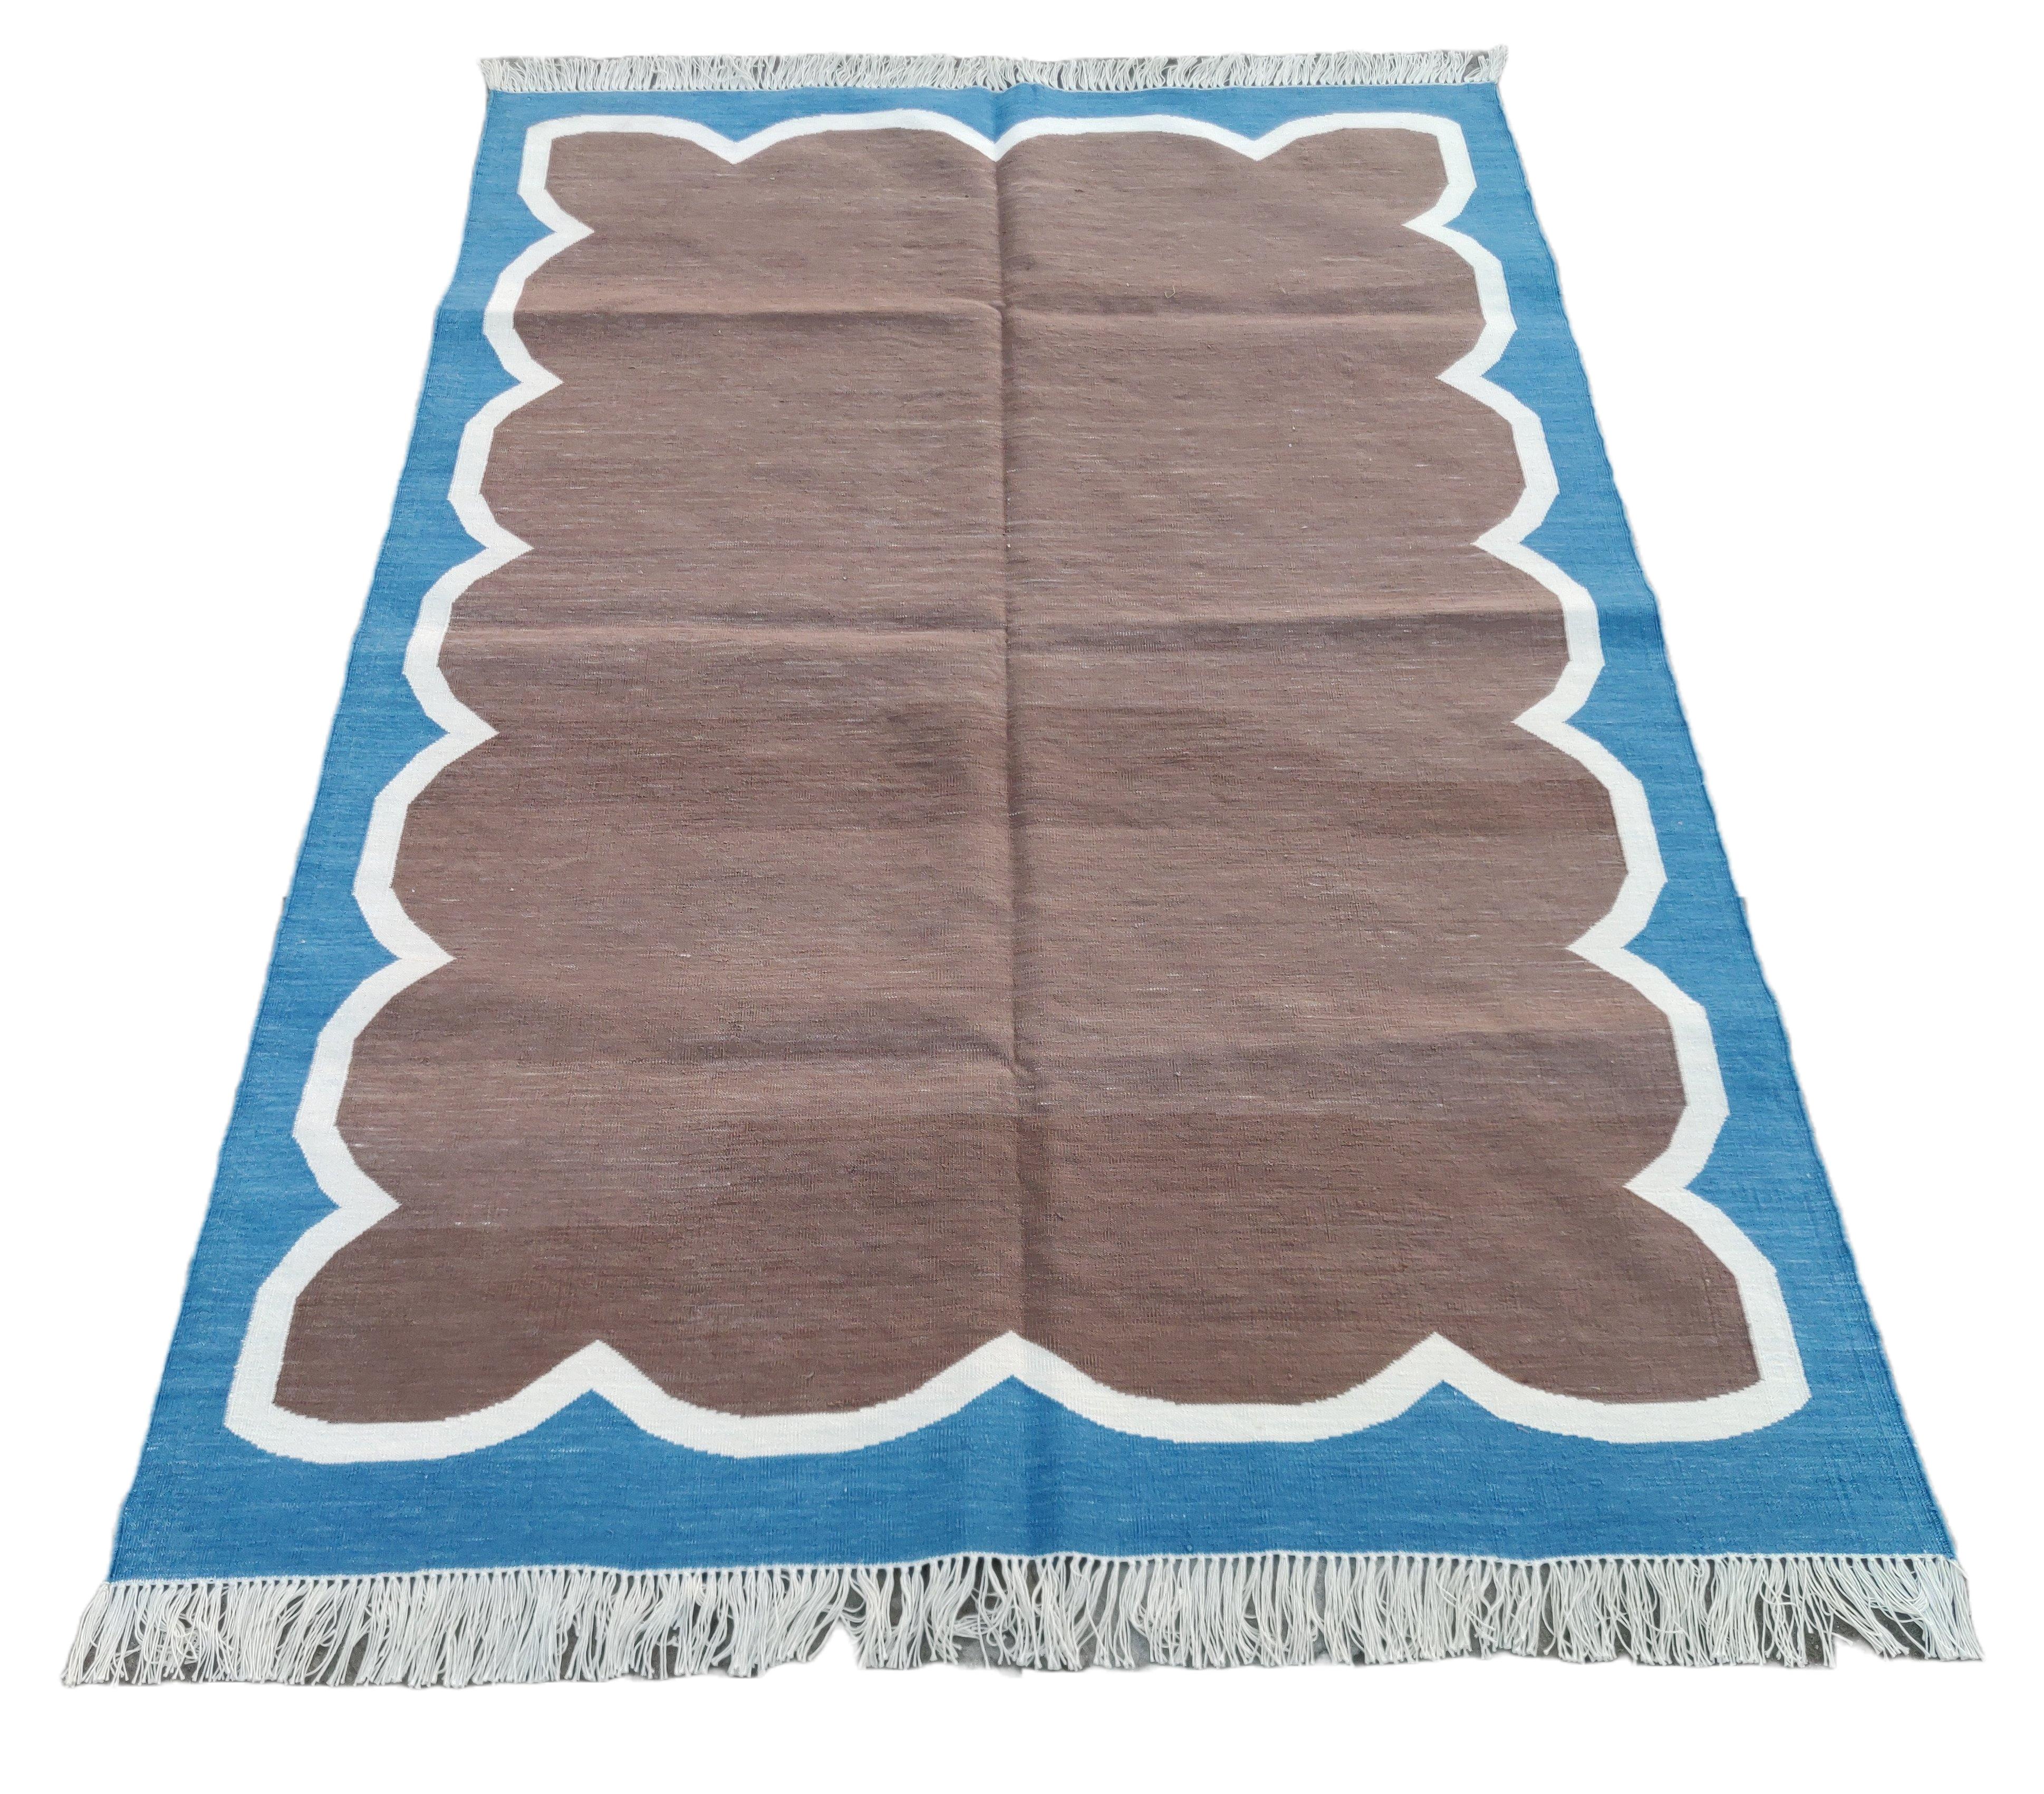 Handmade Cotton Area Flat Weave Rug, 4x6 Brown And Blue Striped Indian Dhurrie In New Condition For Sale In Jaipur, IN